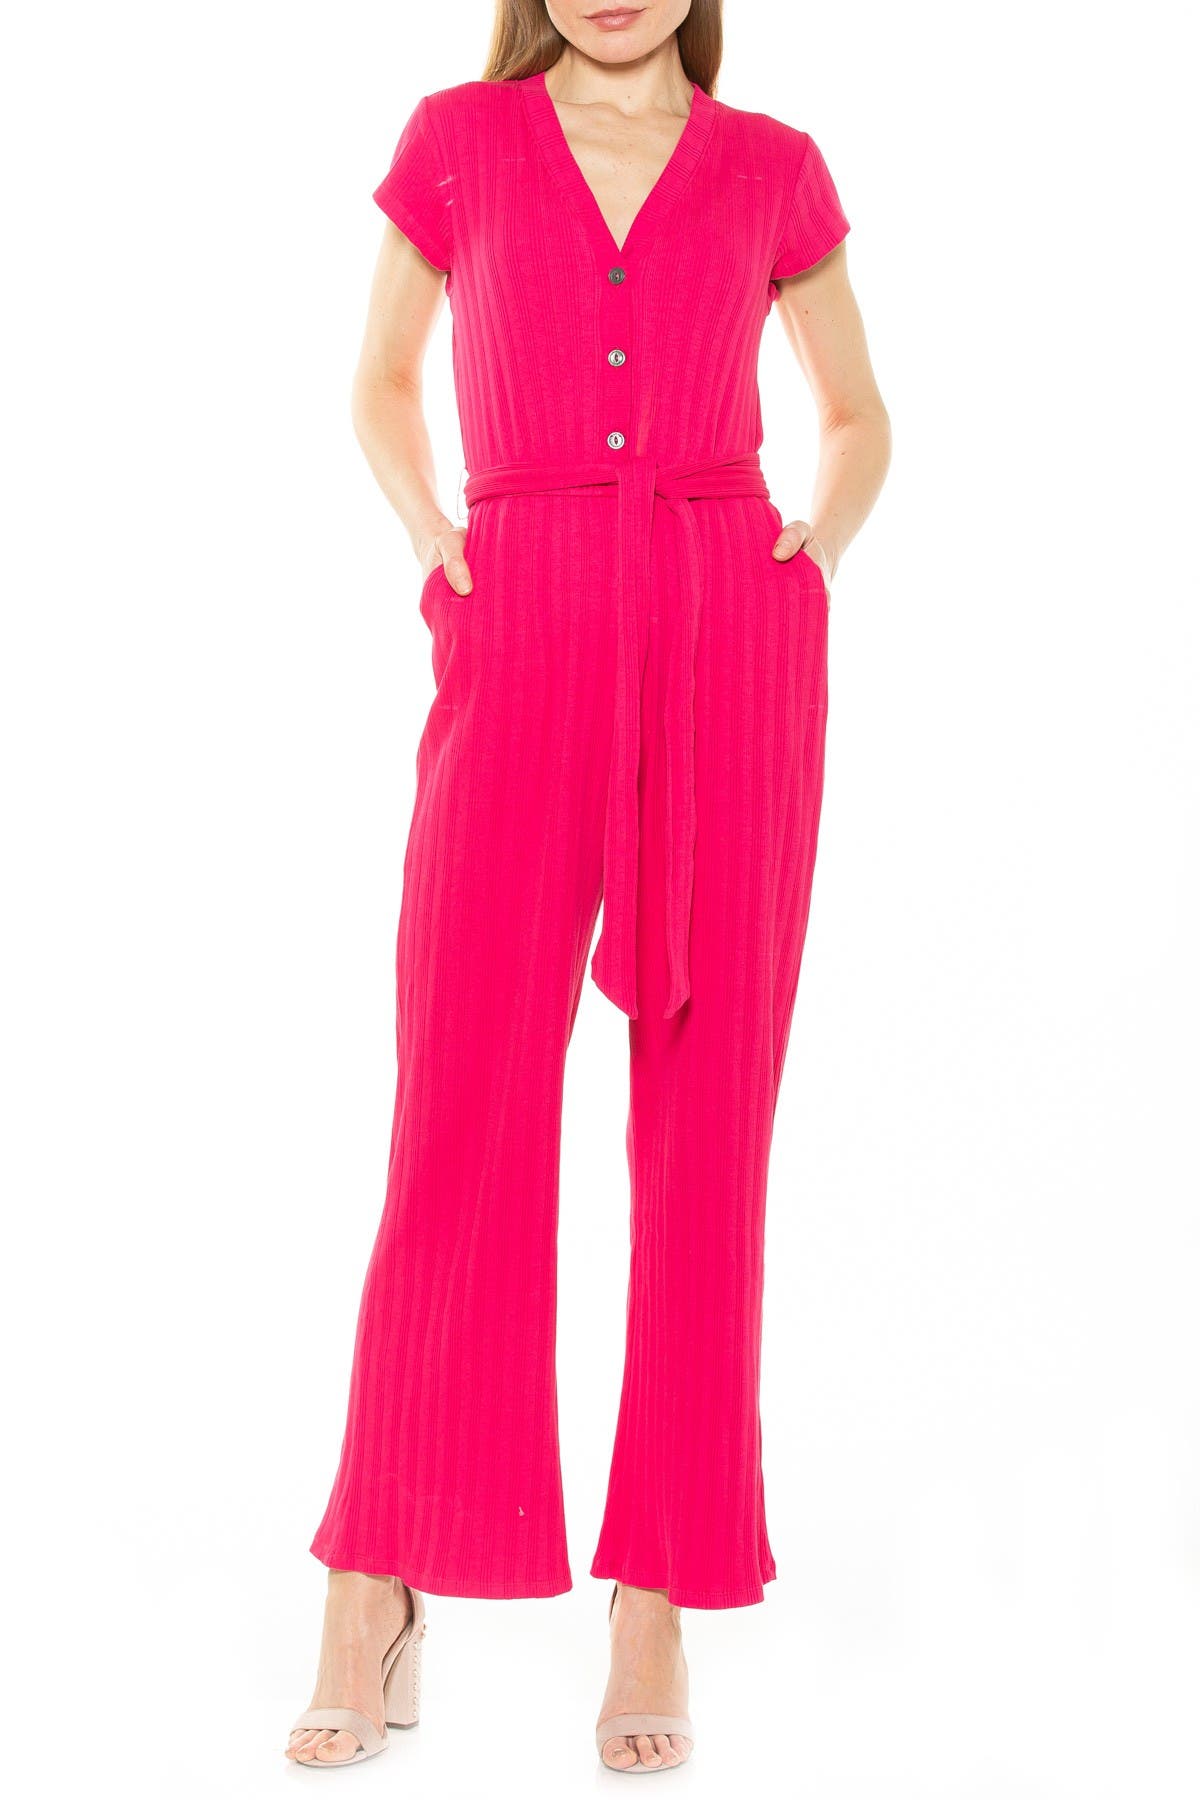 Alexia Admor Ezra Ribbed Button Down Straight Leg Jumpsuit In Hot Pink